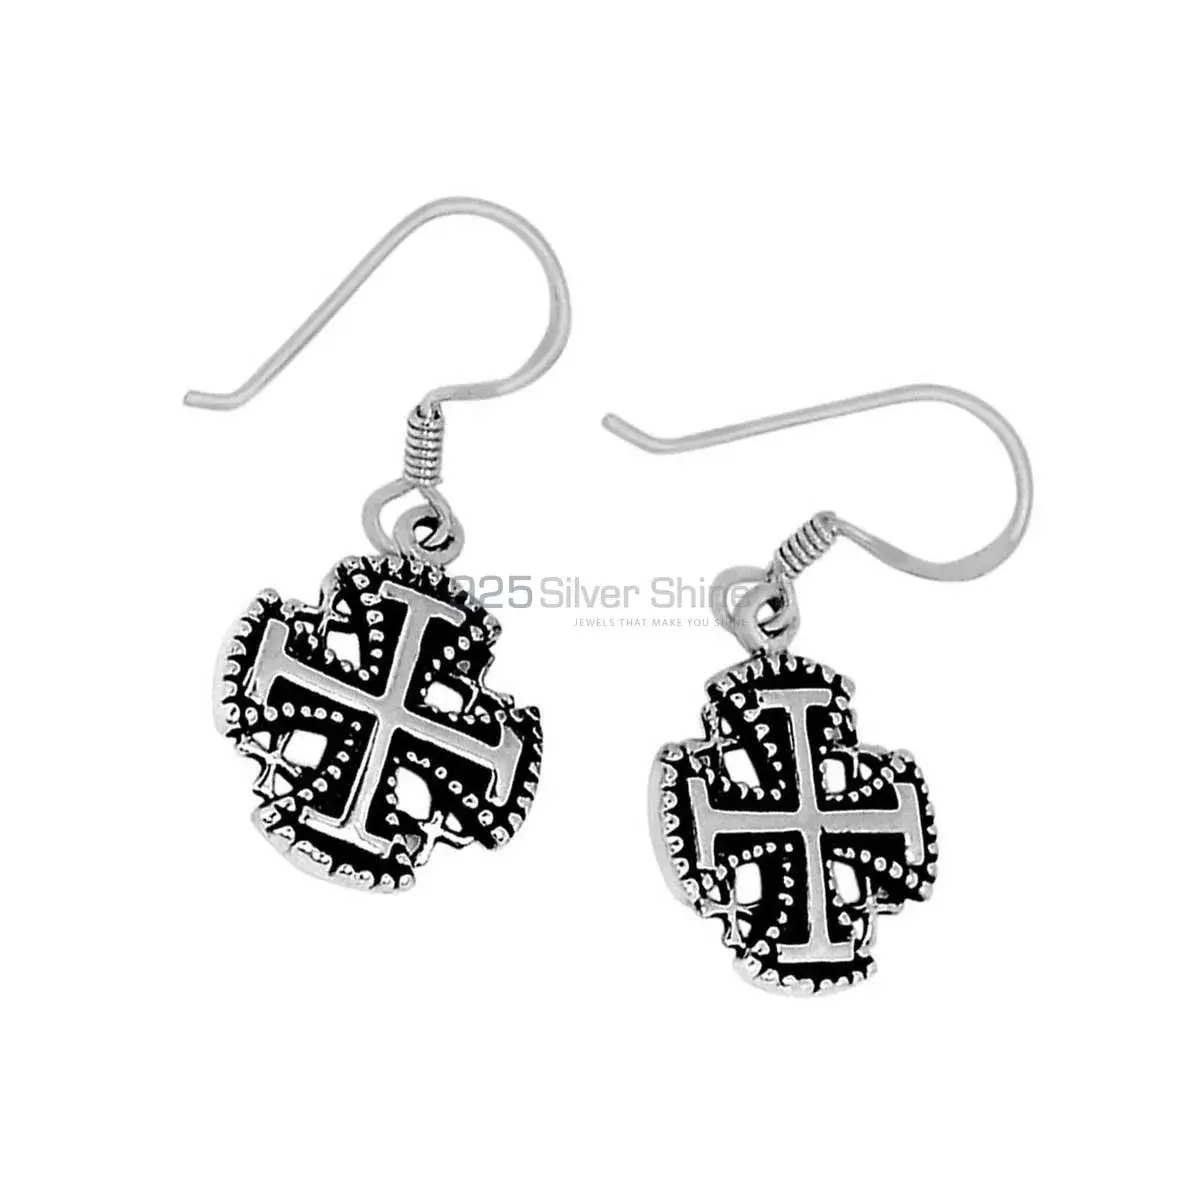 Affordable 925 Sterling Silver Handmade Earrings Suppliers 925SE2878_2